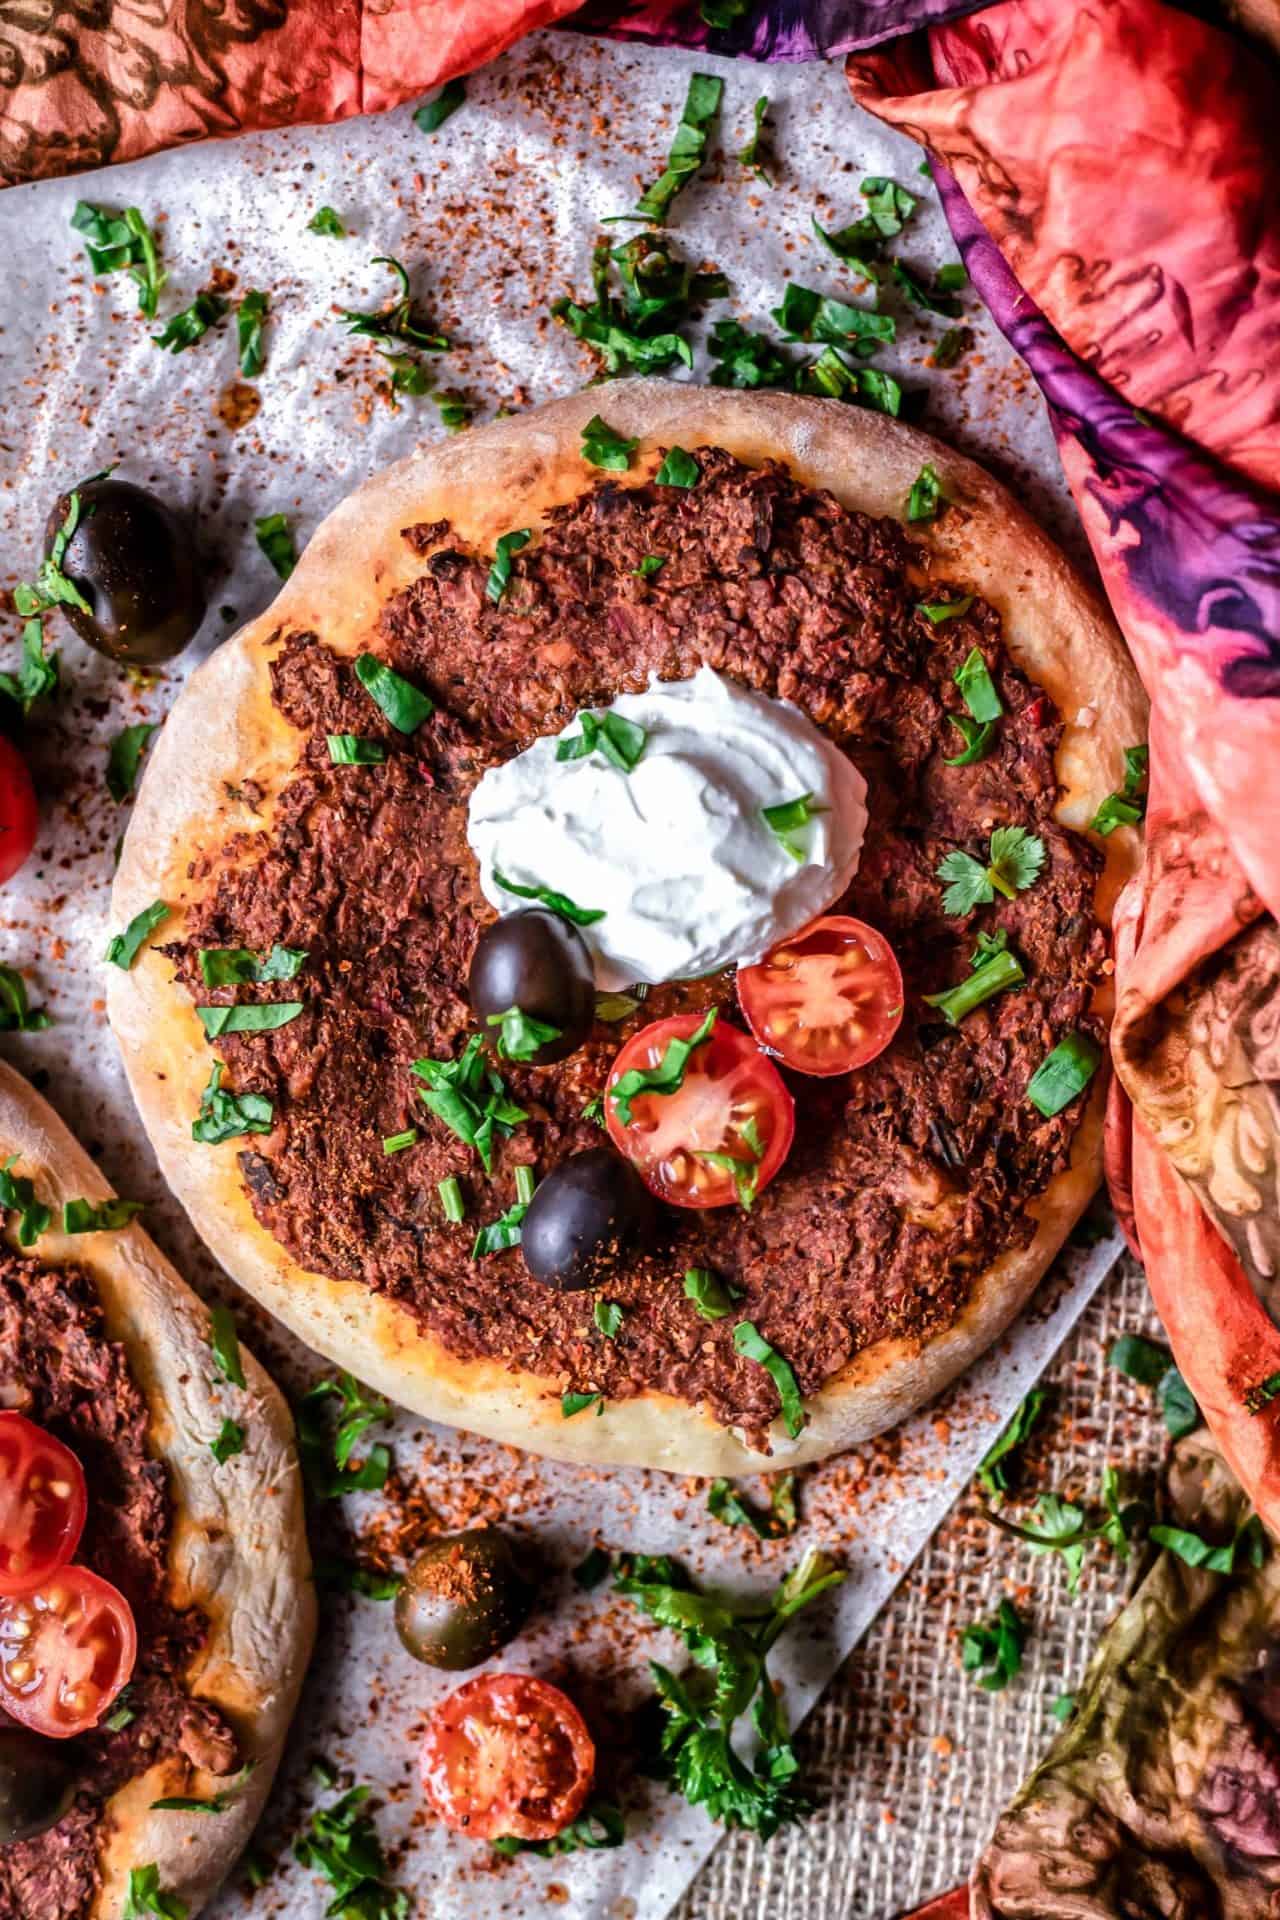 This Vegan Turkish Pizza is versatile, wholesome, healthy, bursting with flavour, simple to make and just so good! The recipe is vegan, low FODMAP and gluten-free!
